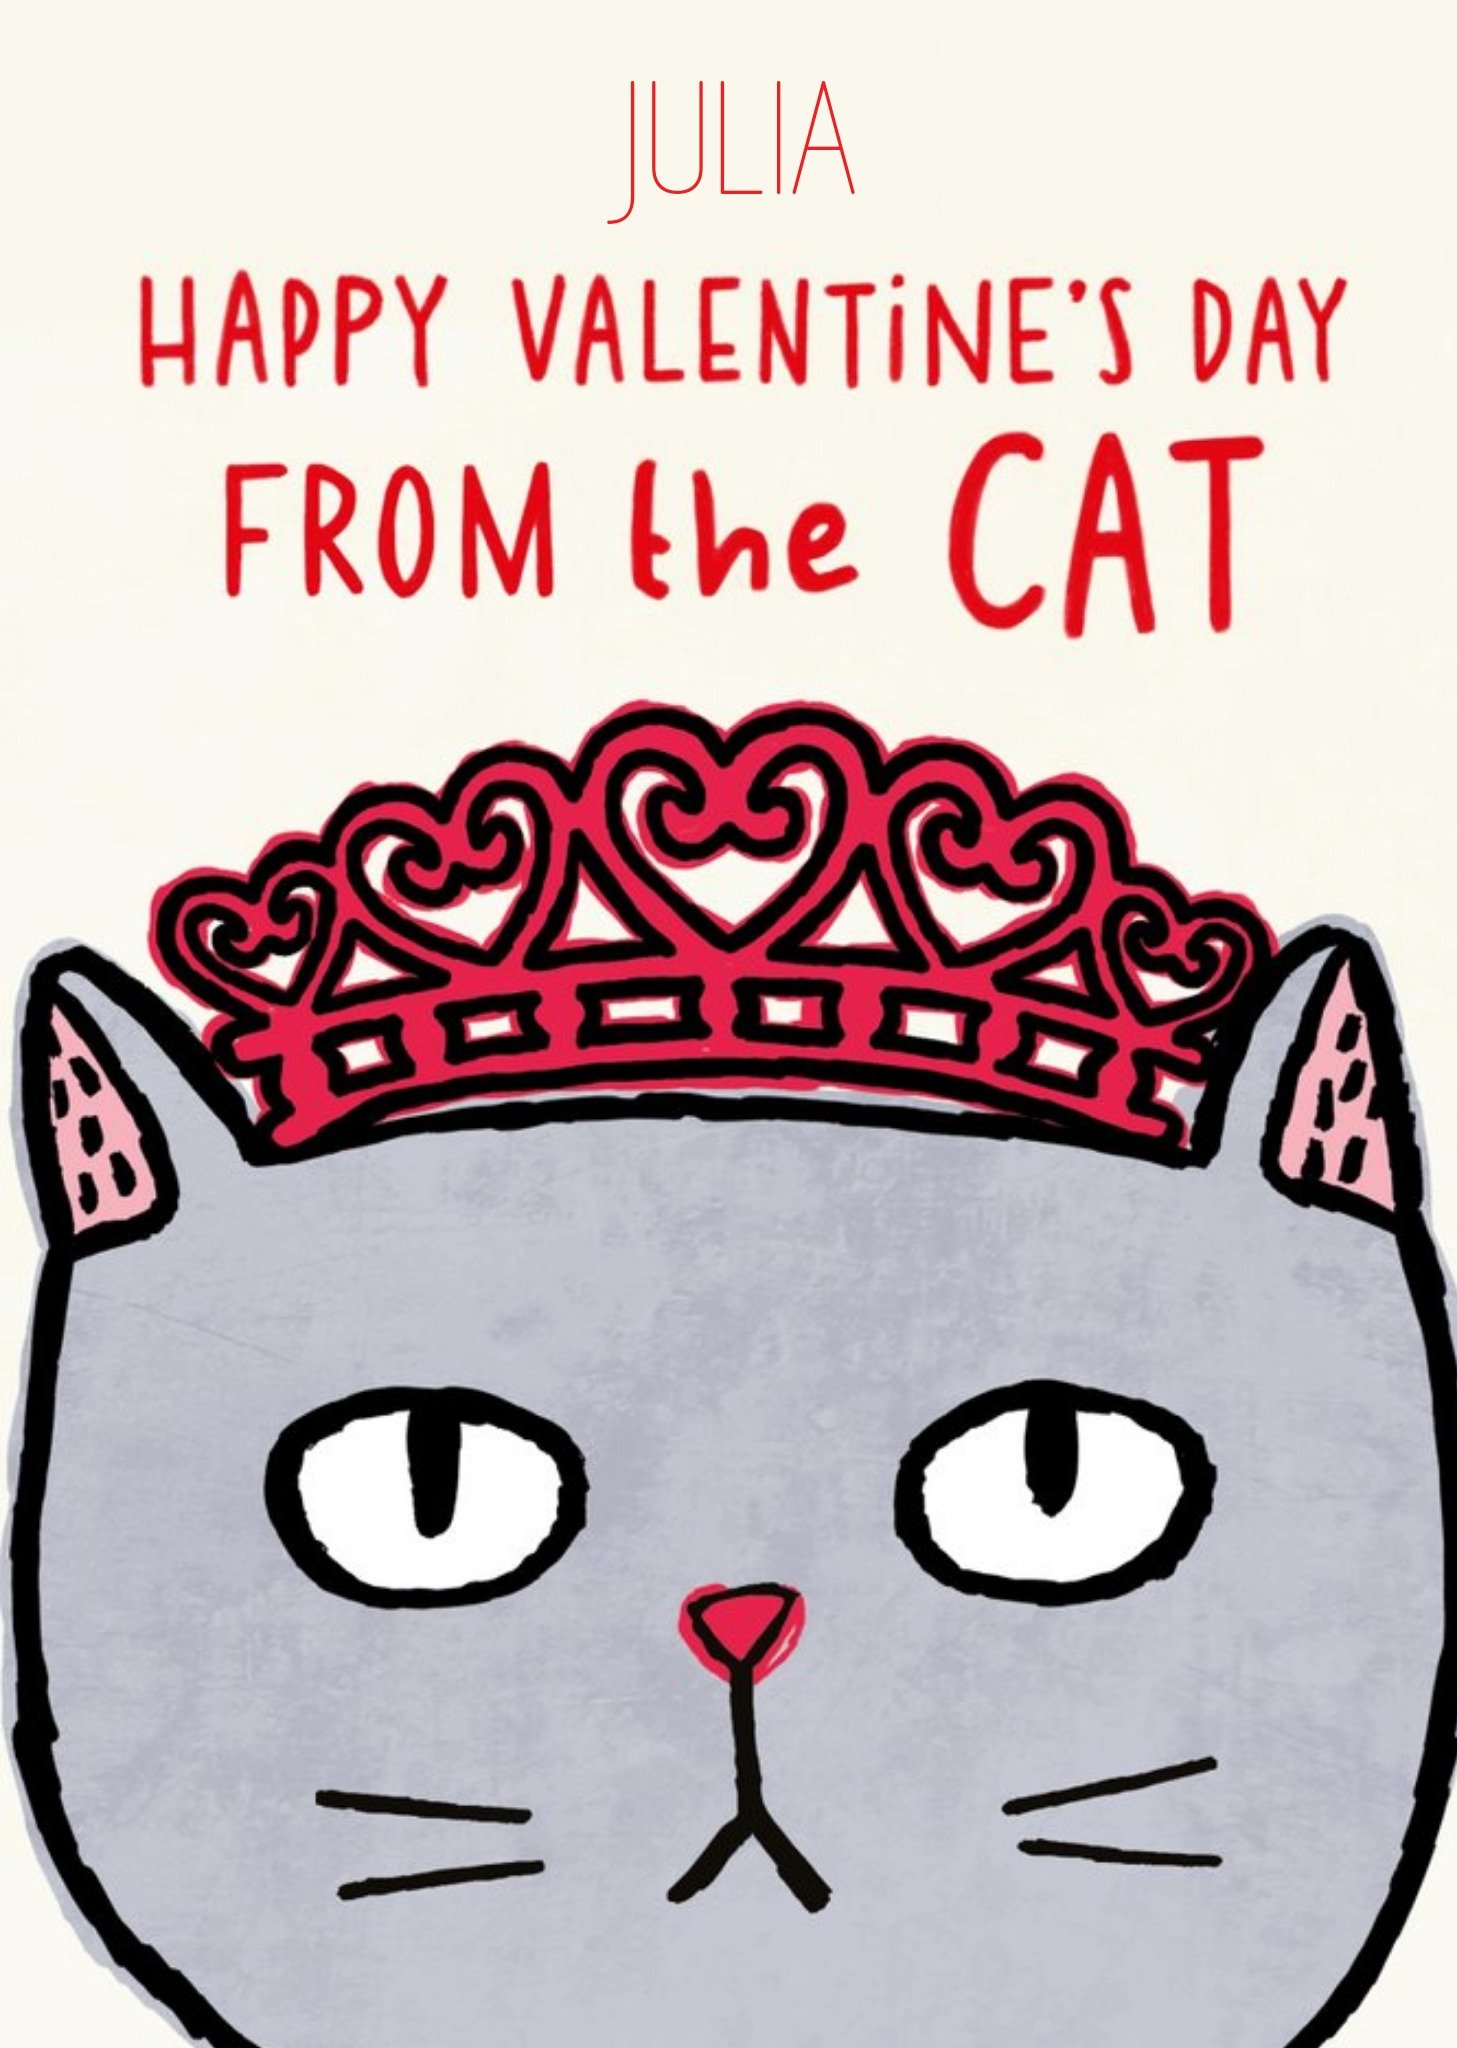 Moonpig Illustration Of A Cat Wearing A Tiara From The Cat Valentine's Day Card, Large